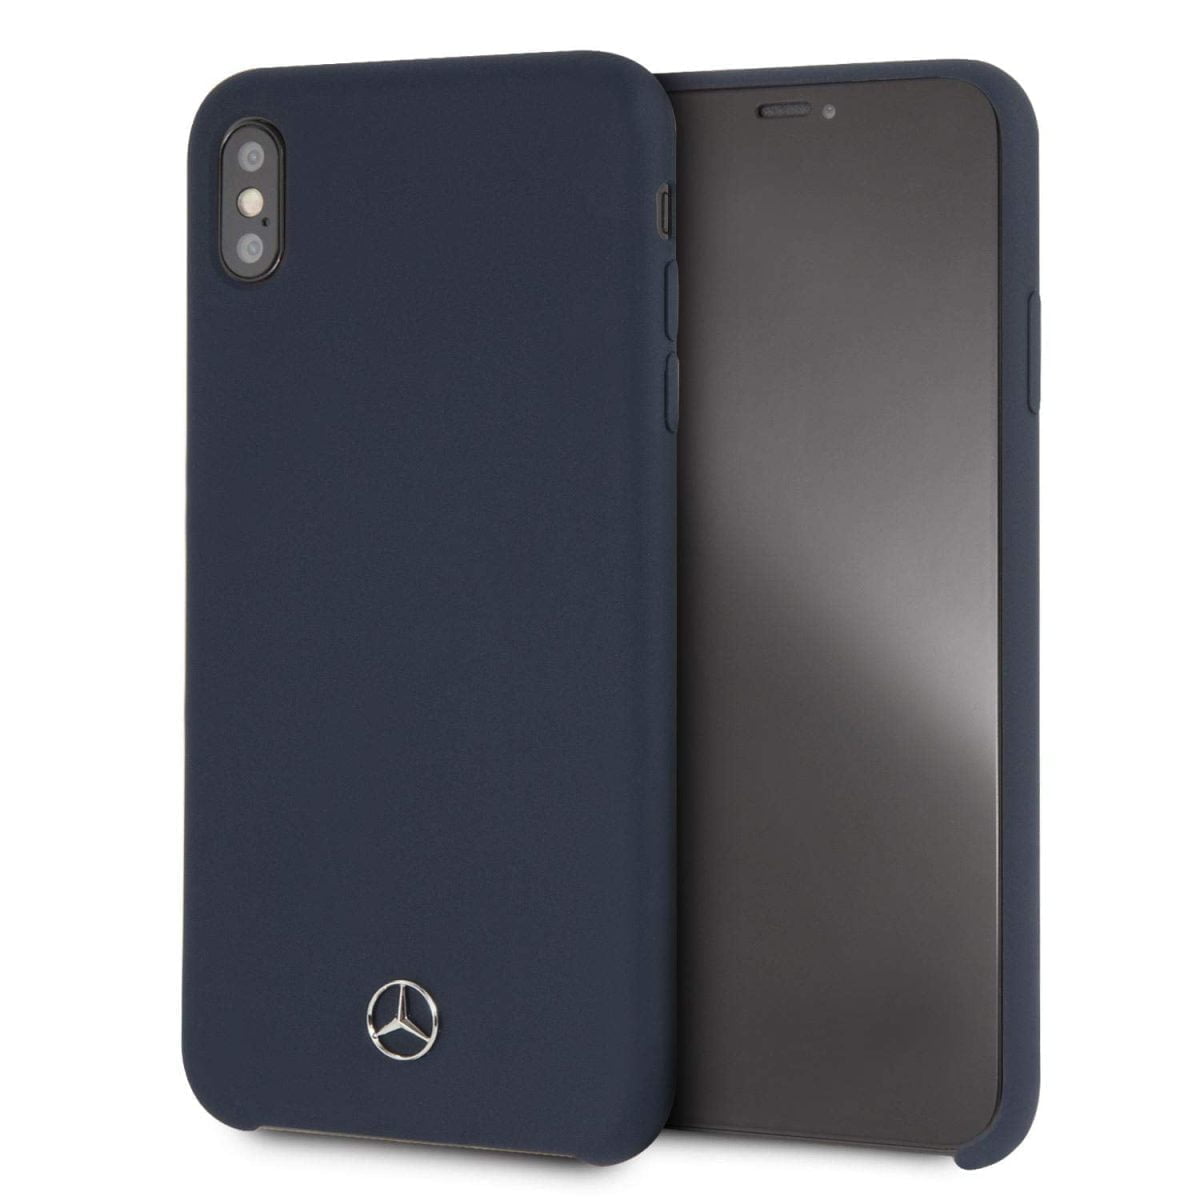 Mercedes Benz Iphone Xs Max Liquid Silicon Silcon Case With Microfiber Lining Navy 01 This Hard Silicone Soft Case With A Sculpted Metallic Mercedes Benz Logo For A 3D Effect Gives You A Classic And Elegant Appeal To Your Handheld Device It Has Easy Accessibility For All Ports And Buttons. Case Compatible With Wireless Chargers. Soft Microfiber Interior, Easy To Hold &Amp;Amp; Easy Snap-On Design Makes It Fast And Easy To Install Or Take Off In Seconds This Case Provides Both The Ultimate Luxury Experience And Protection From Scratches And Abrasions By Slightly Raised Edges Iphone Case Iphone Xs Liquid Silicon Case With Microfiber Lining (Navy Blue) Mercedes-Benz